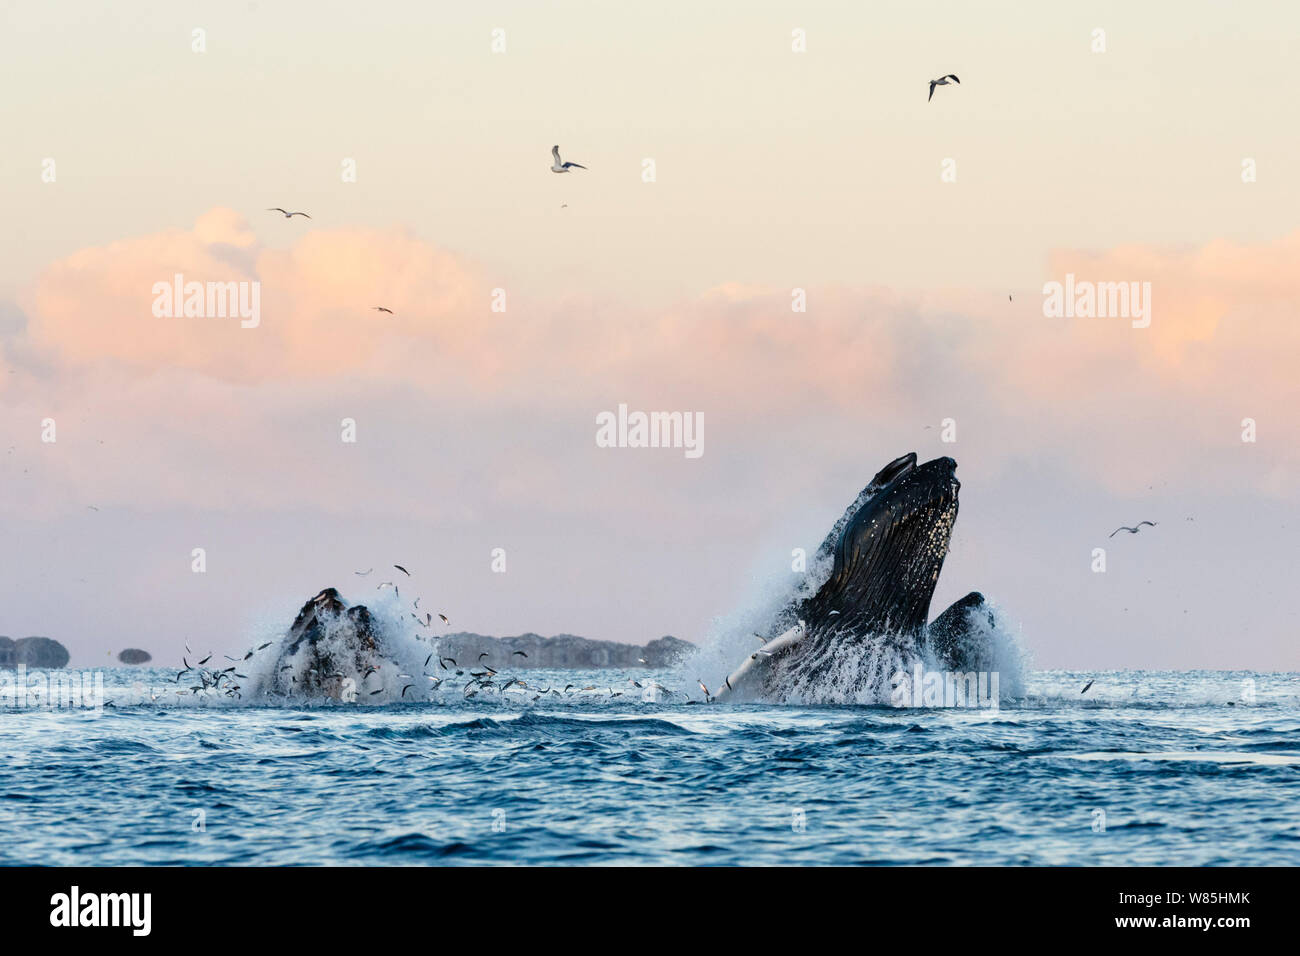 Bubble-net feeding Humpback whales (Megaptera novaeangliae)  feeding on Herring (Clupea harengus) Herring jumping out of the water to escape. Kvaloya, Troms, Northern Norway. November. Stock Photo